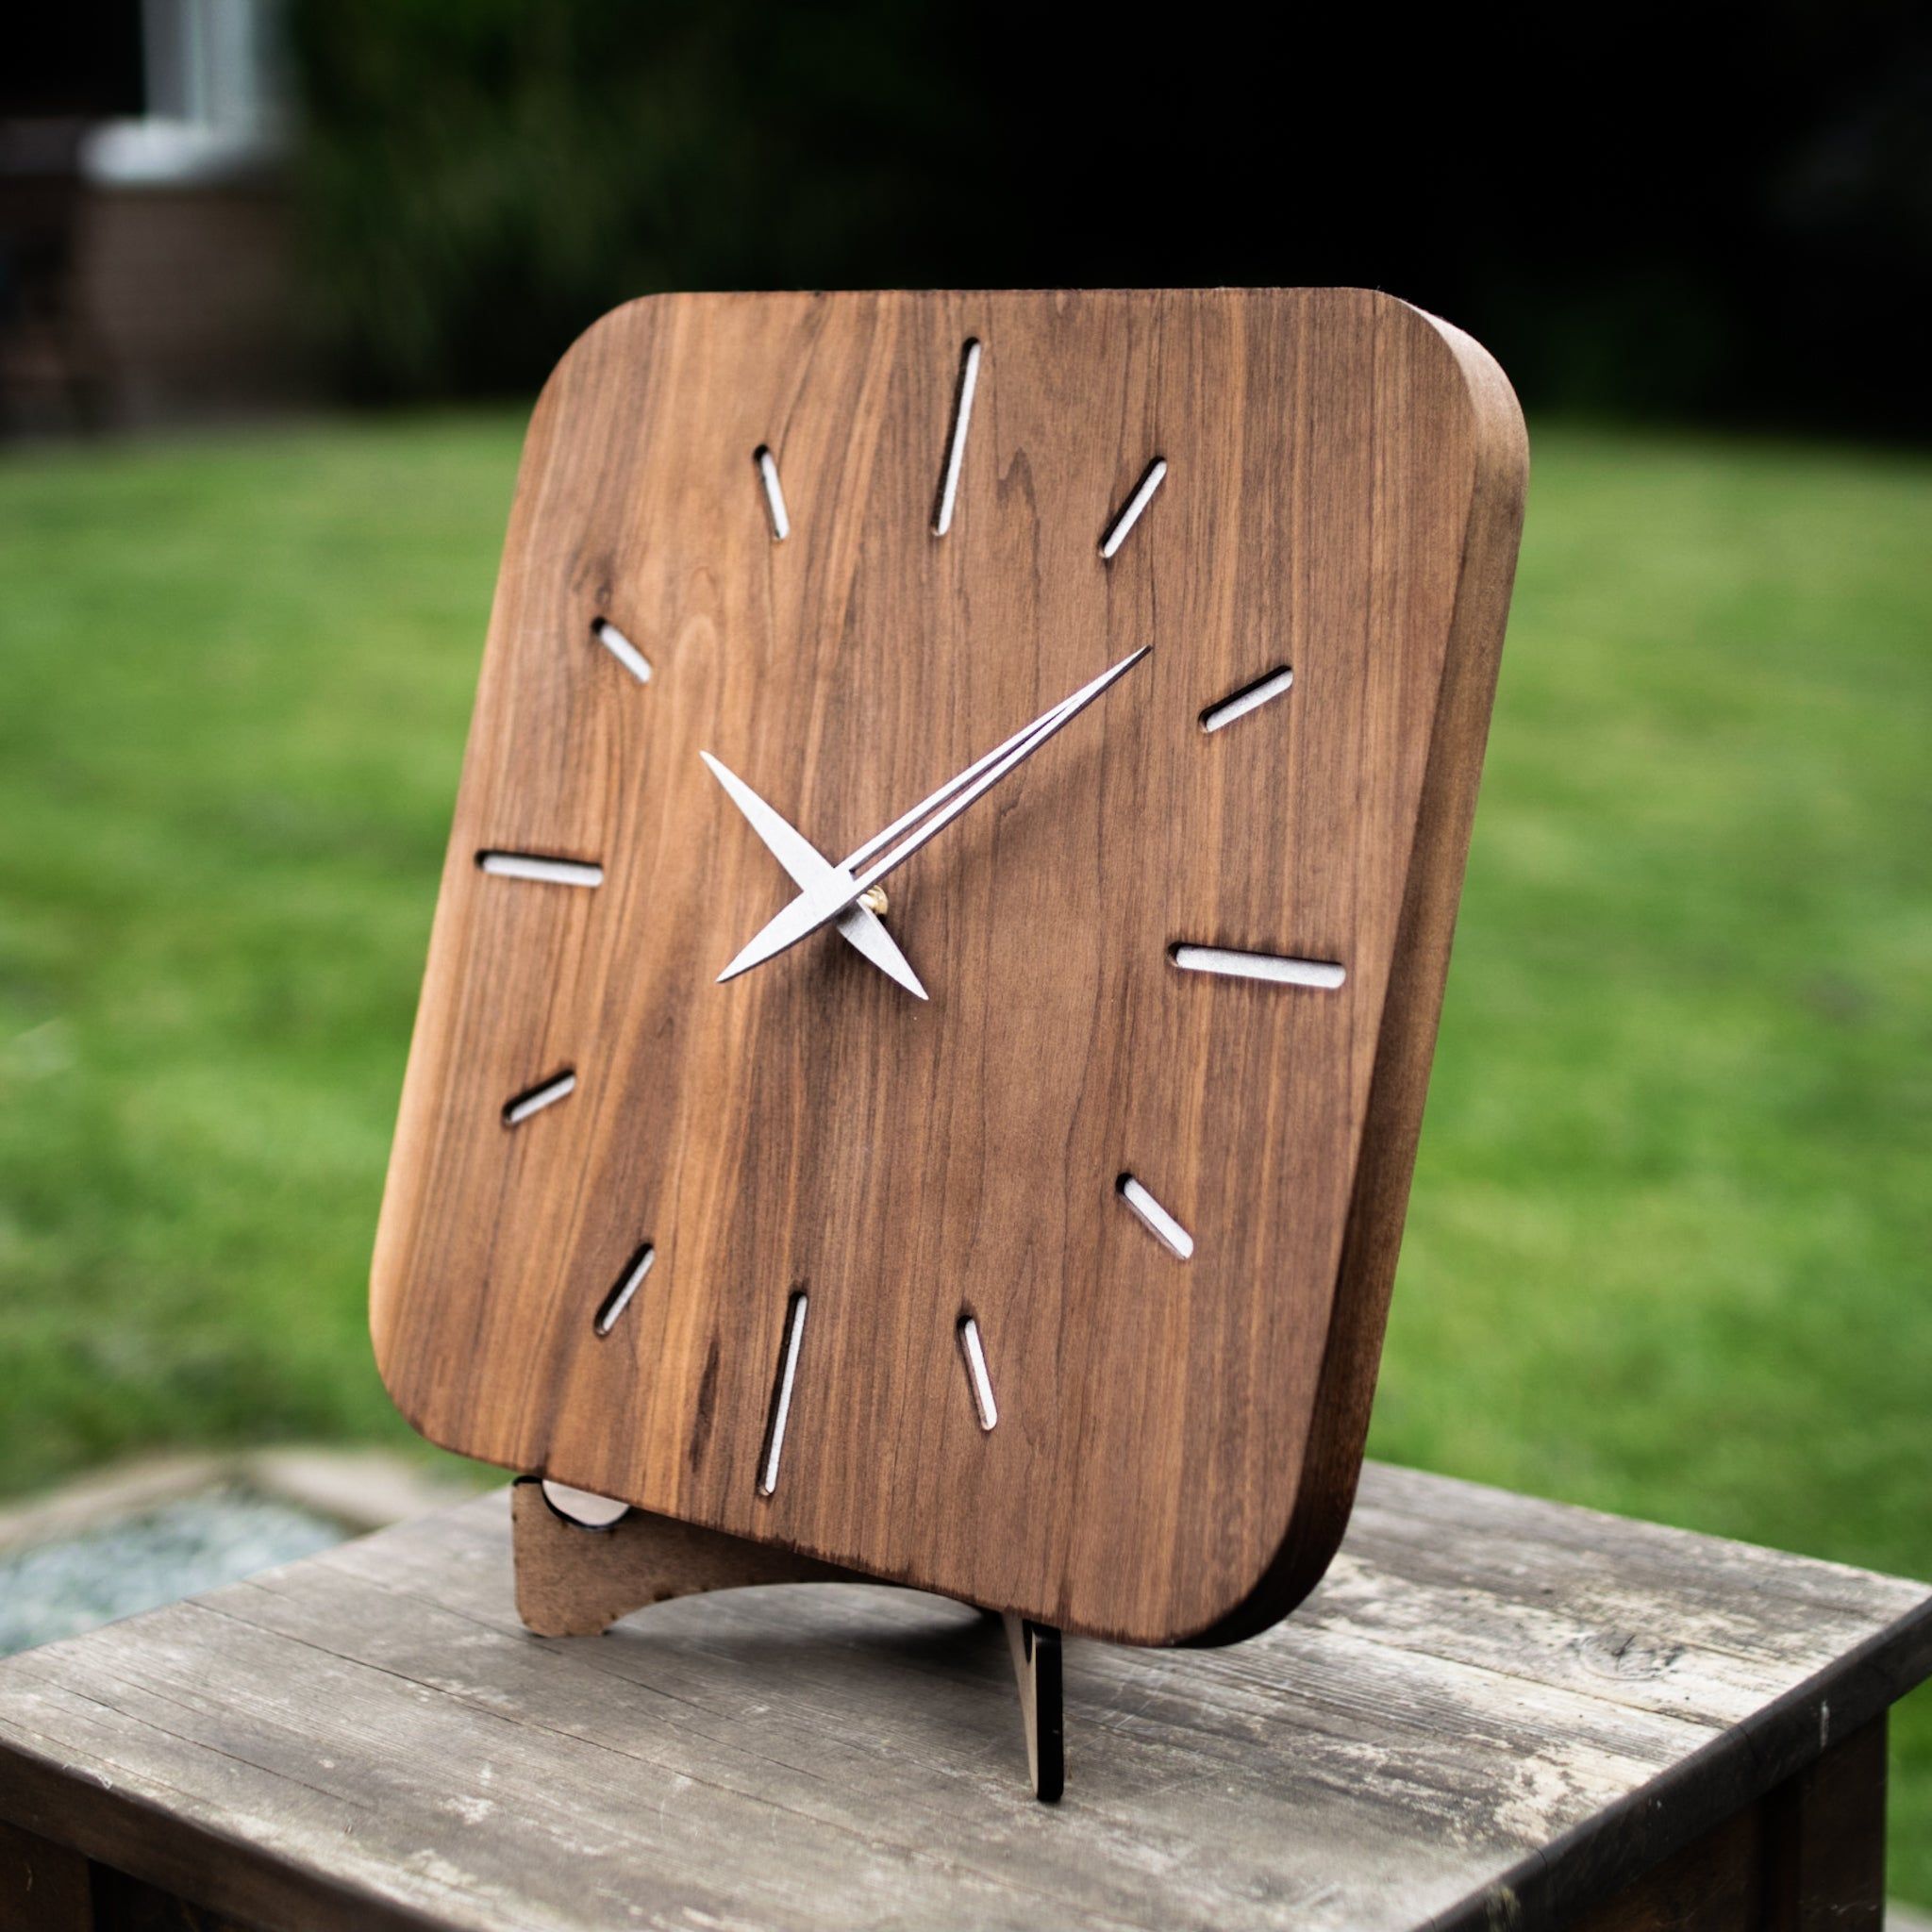 Timeless Tradition: Stay on Schedule with Square Clocks